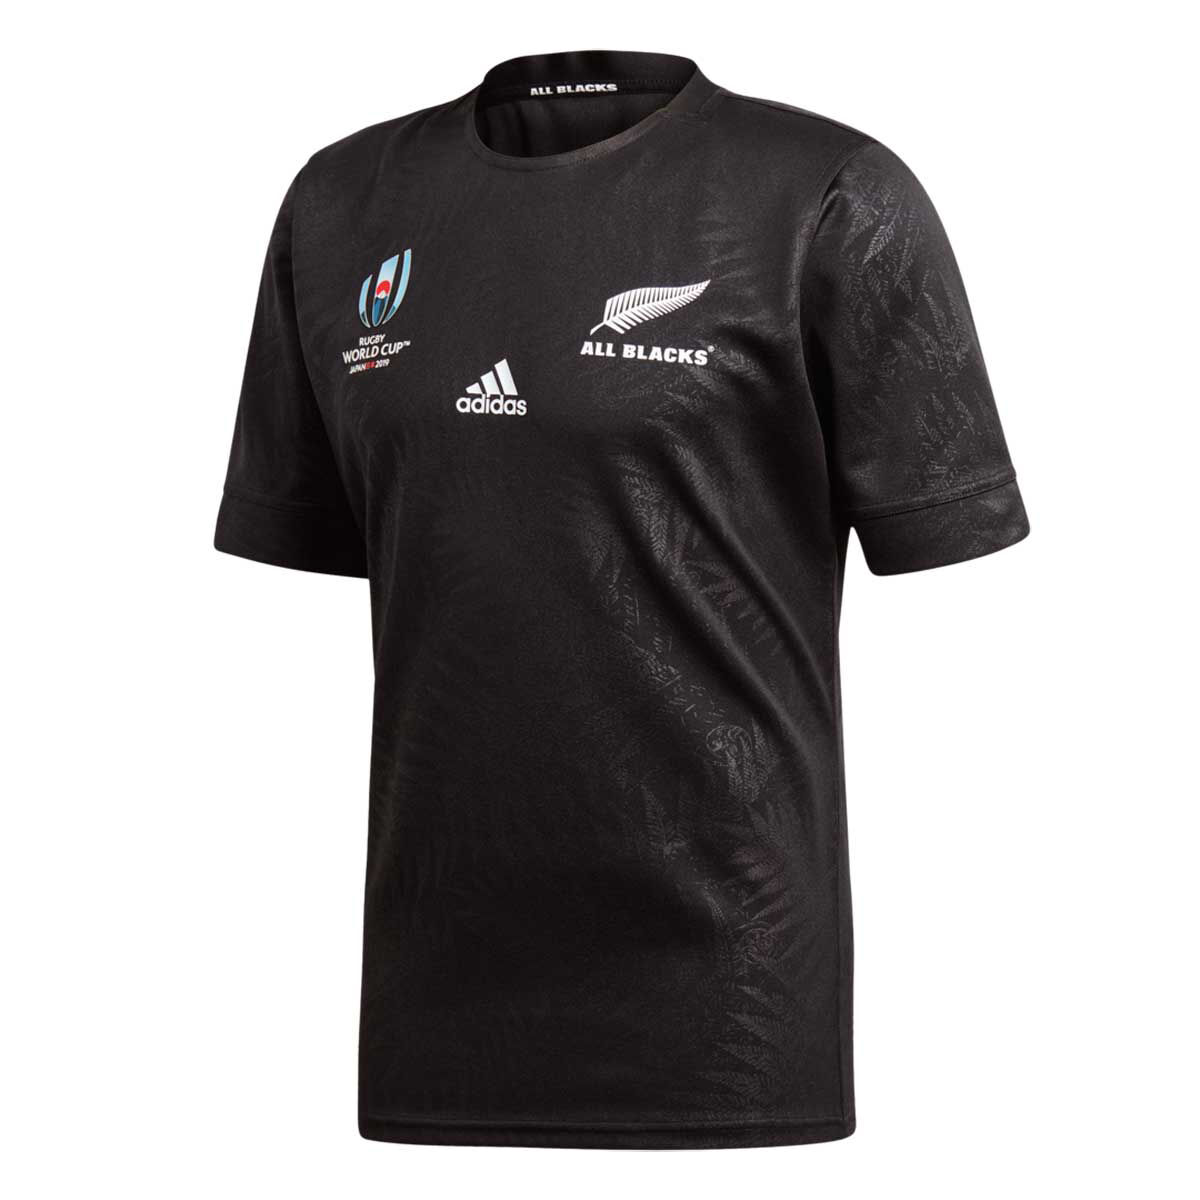 jersey for world cup 2019